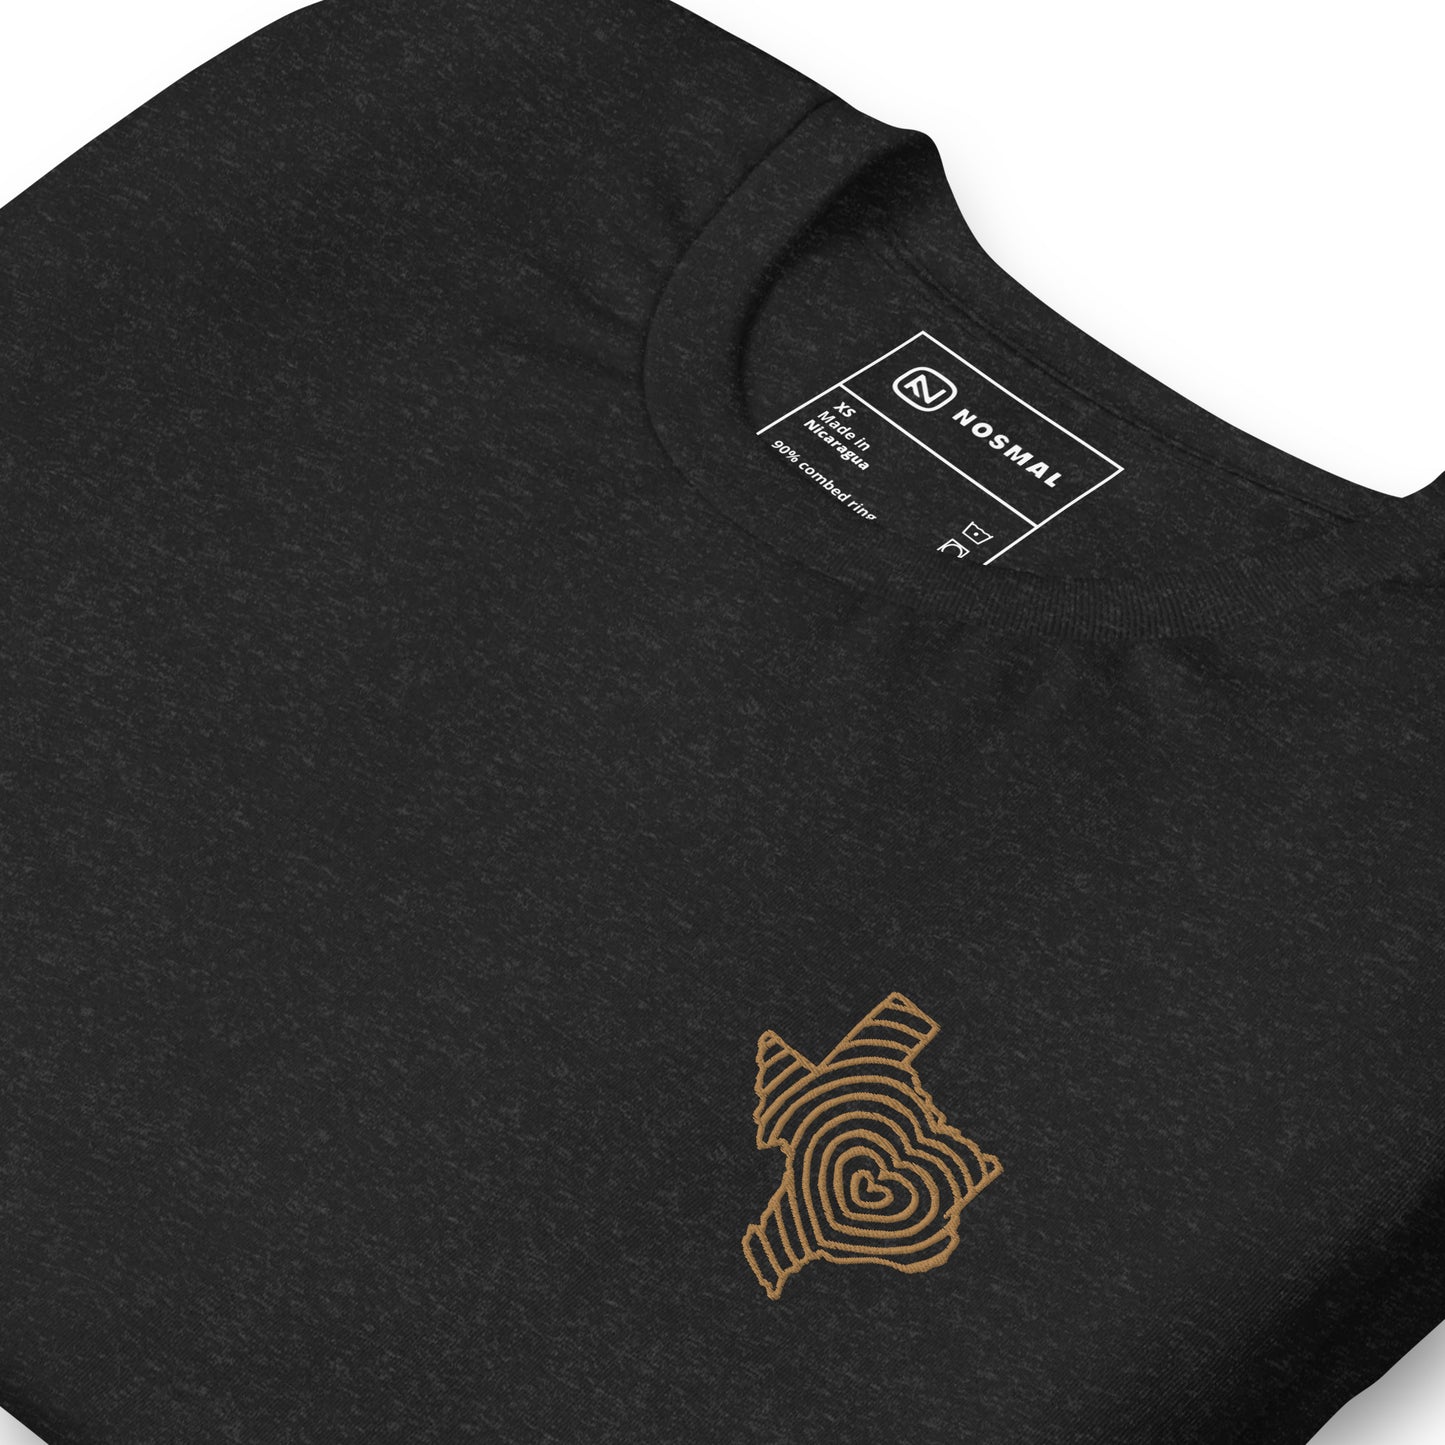 Angled close up shot of heartbeat of texas gold embroidered design on heather black unisex t-shirt.